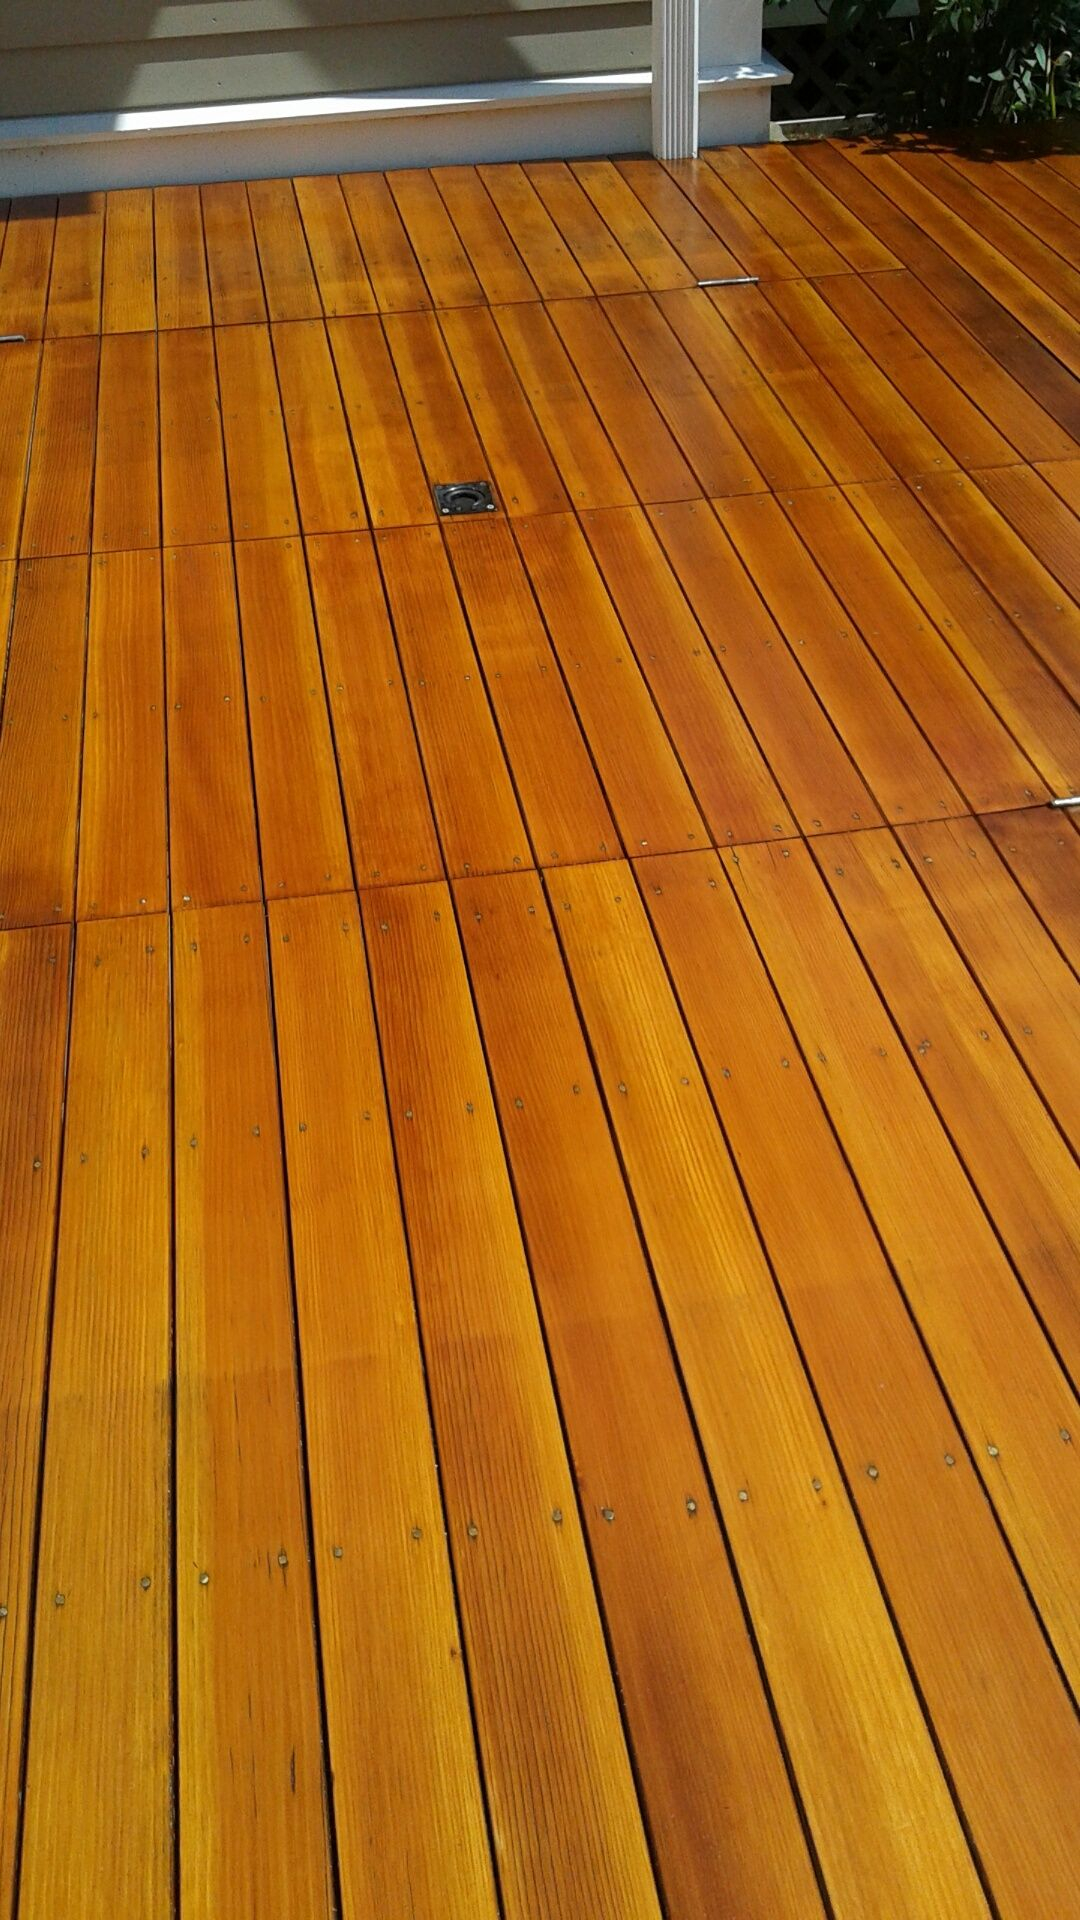 Warm Toned Douglas Fir Deck Stained With A Natural Tone Stain In pertaining to sizing 1080 X 1920